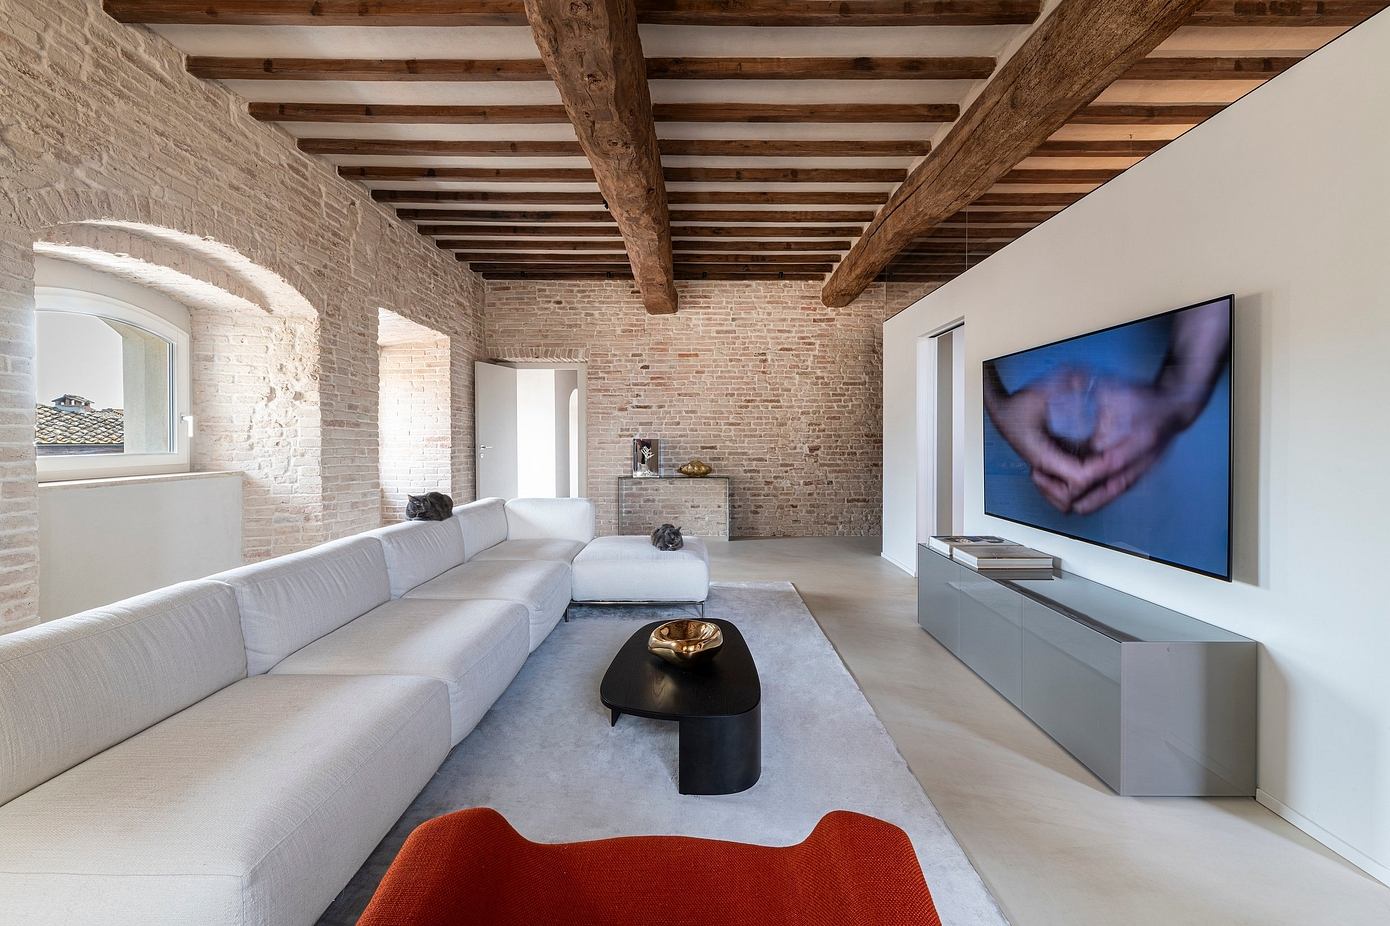 Medieval Palace in Siena: A Striking Blend of Medieval and Modern Design